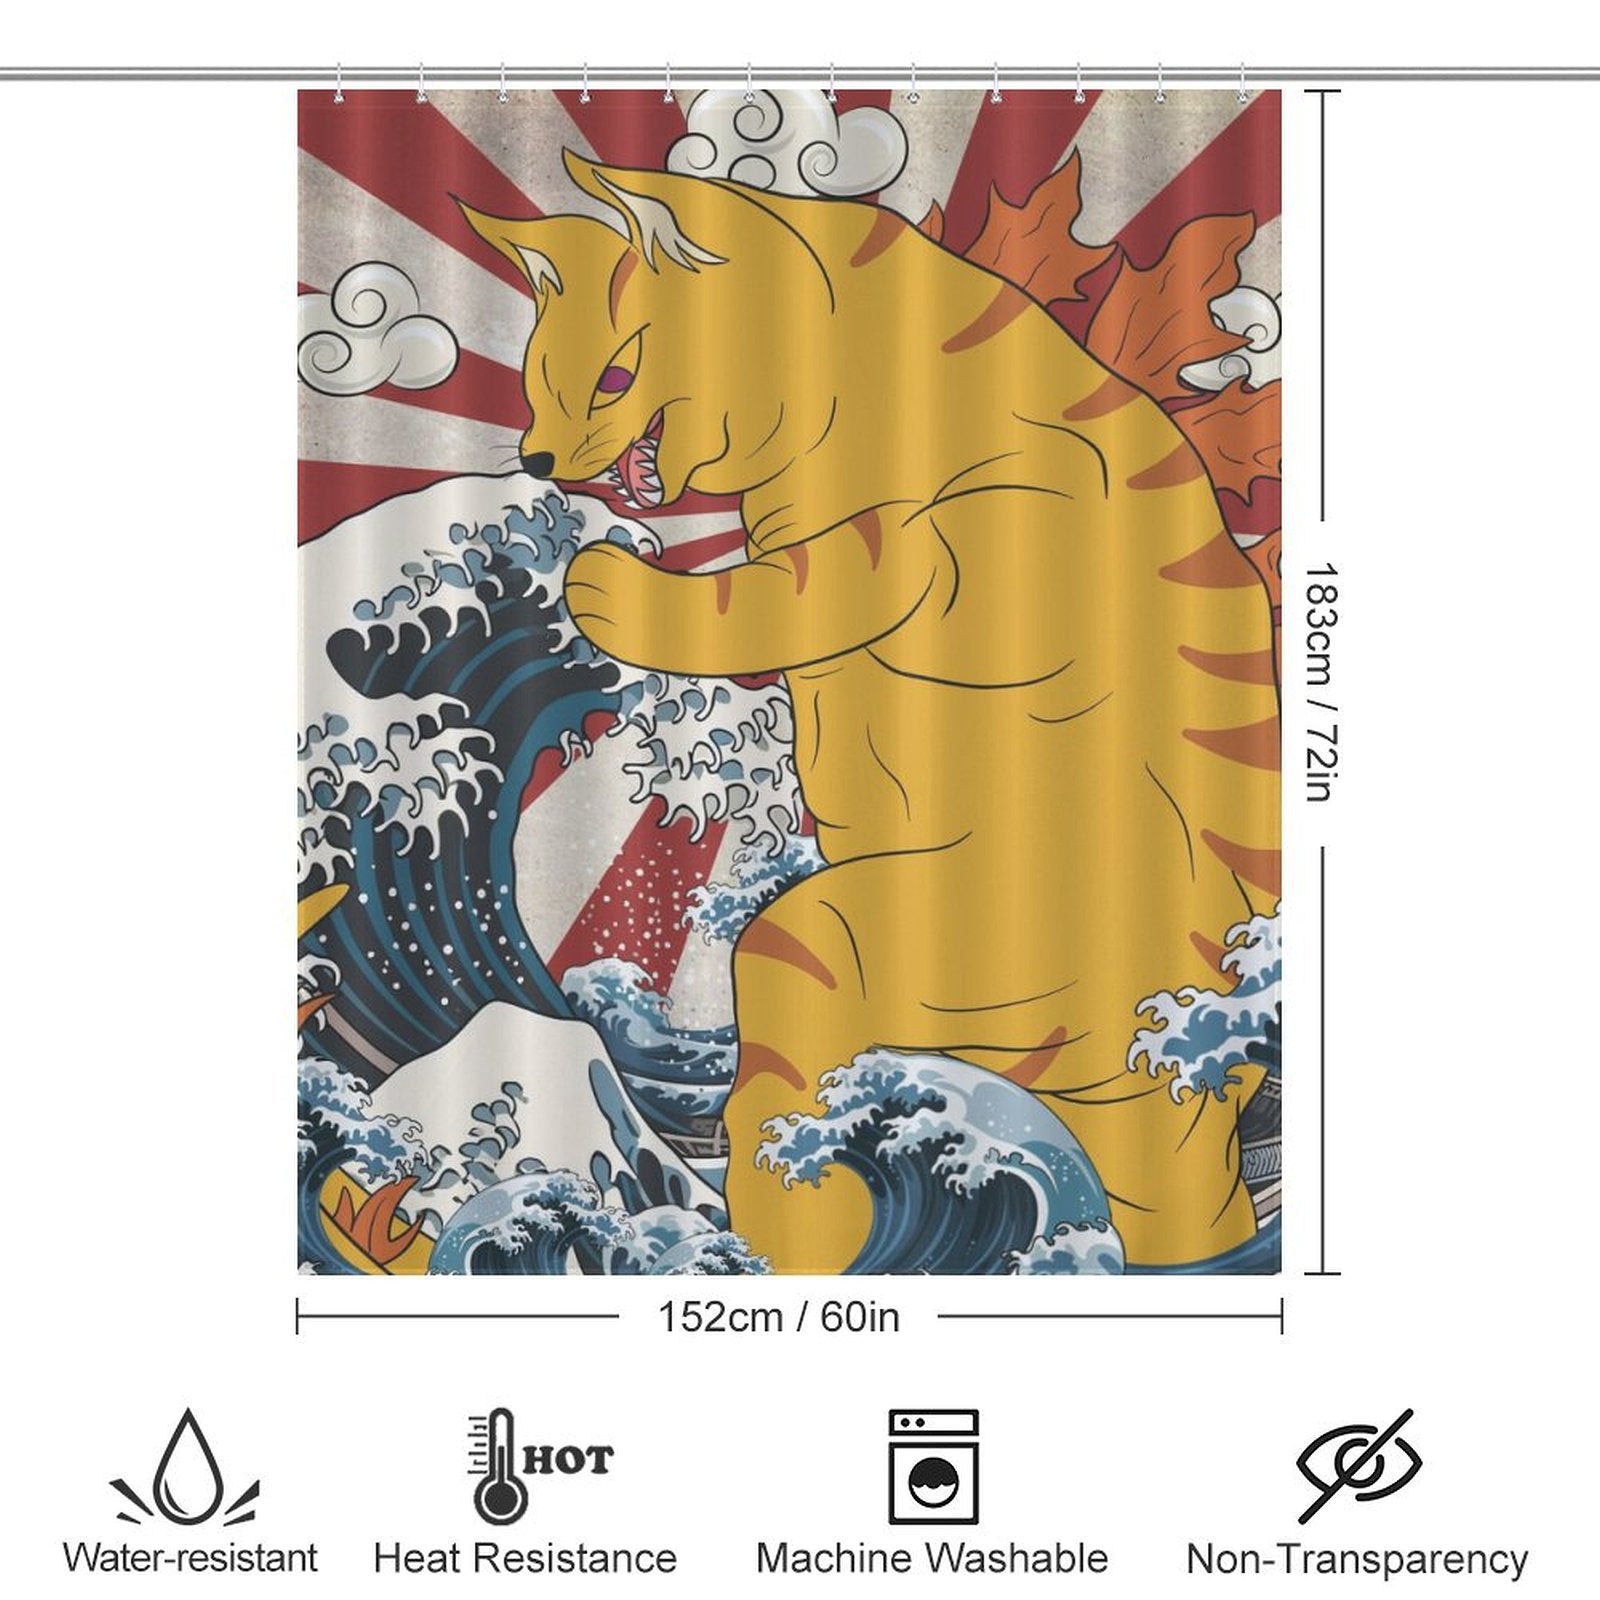 A whimsical bathroom decor piece, the Funny Wave Monster Cat Shower Curtain-Cottoncat by Cotton Cat showcases a striped feline with a fiery tail amid waves and a sunburst background. Icons indicate the curtain is waterproof and mildew-resistant, as well as machine washable.